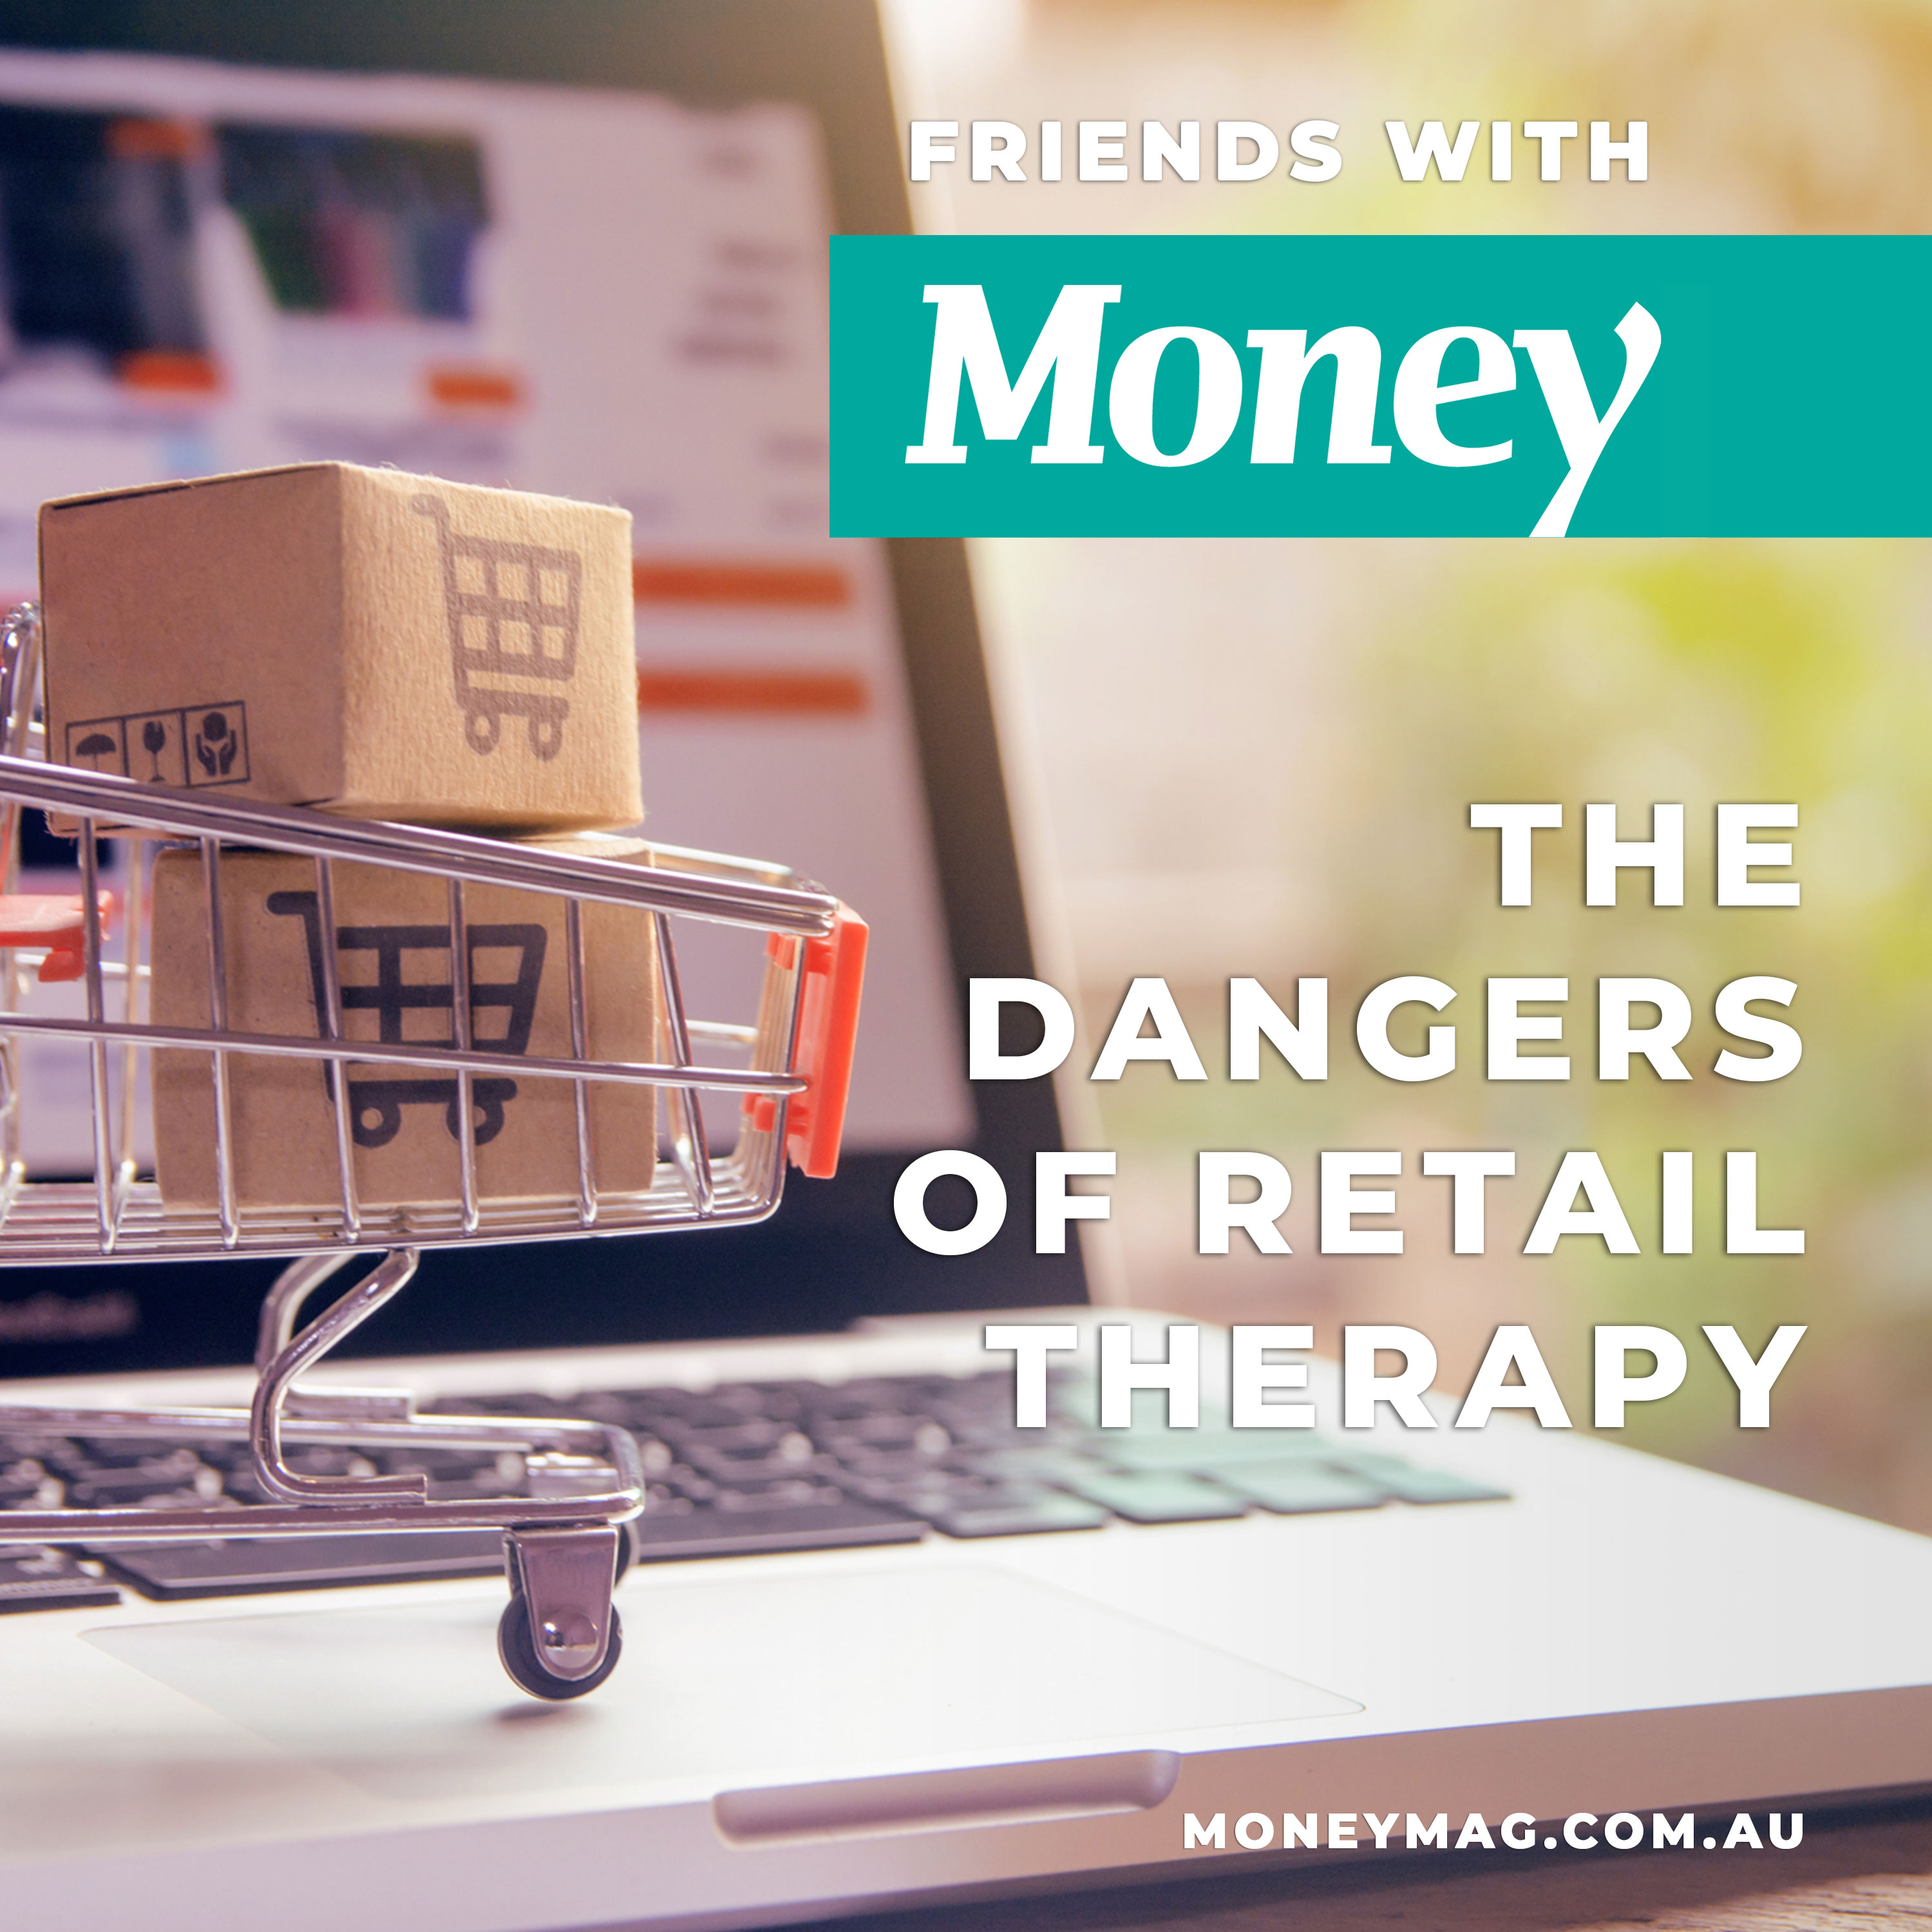 The dangers of retail therapy